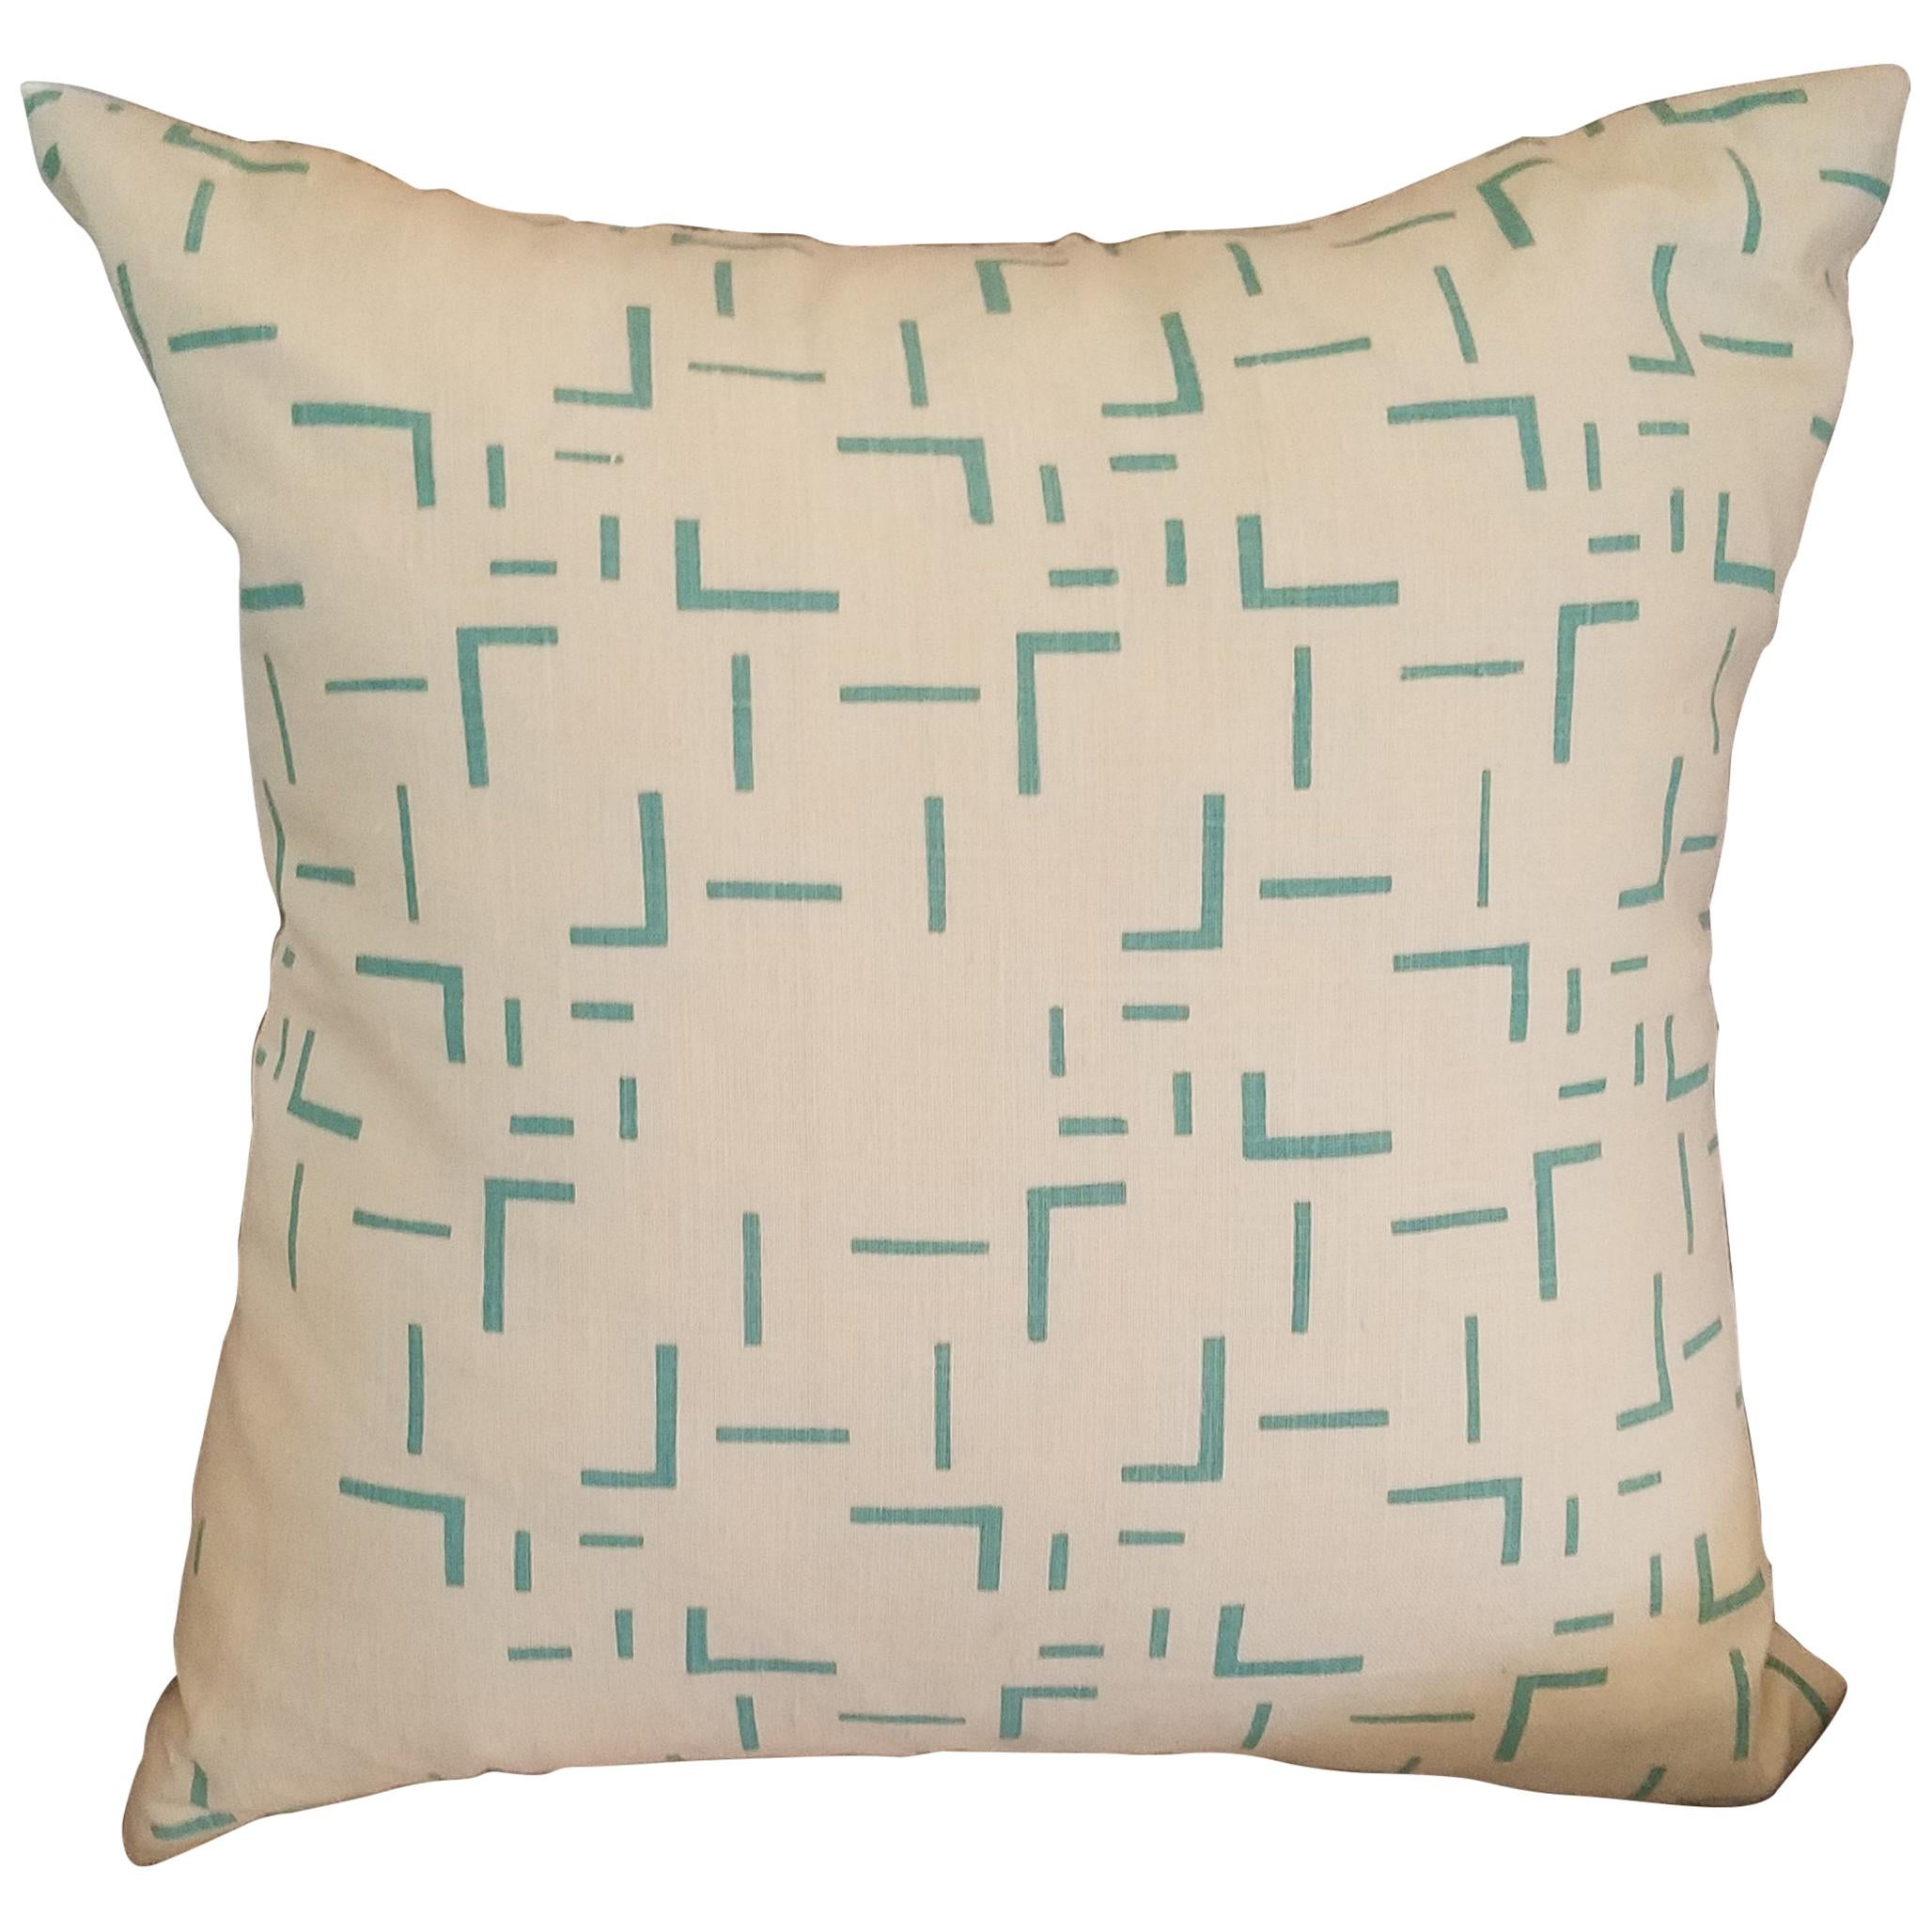 Abstract Geometric Printed Pillow